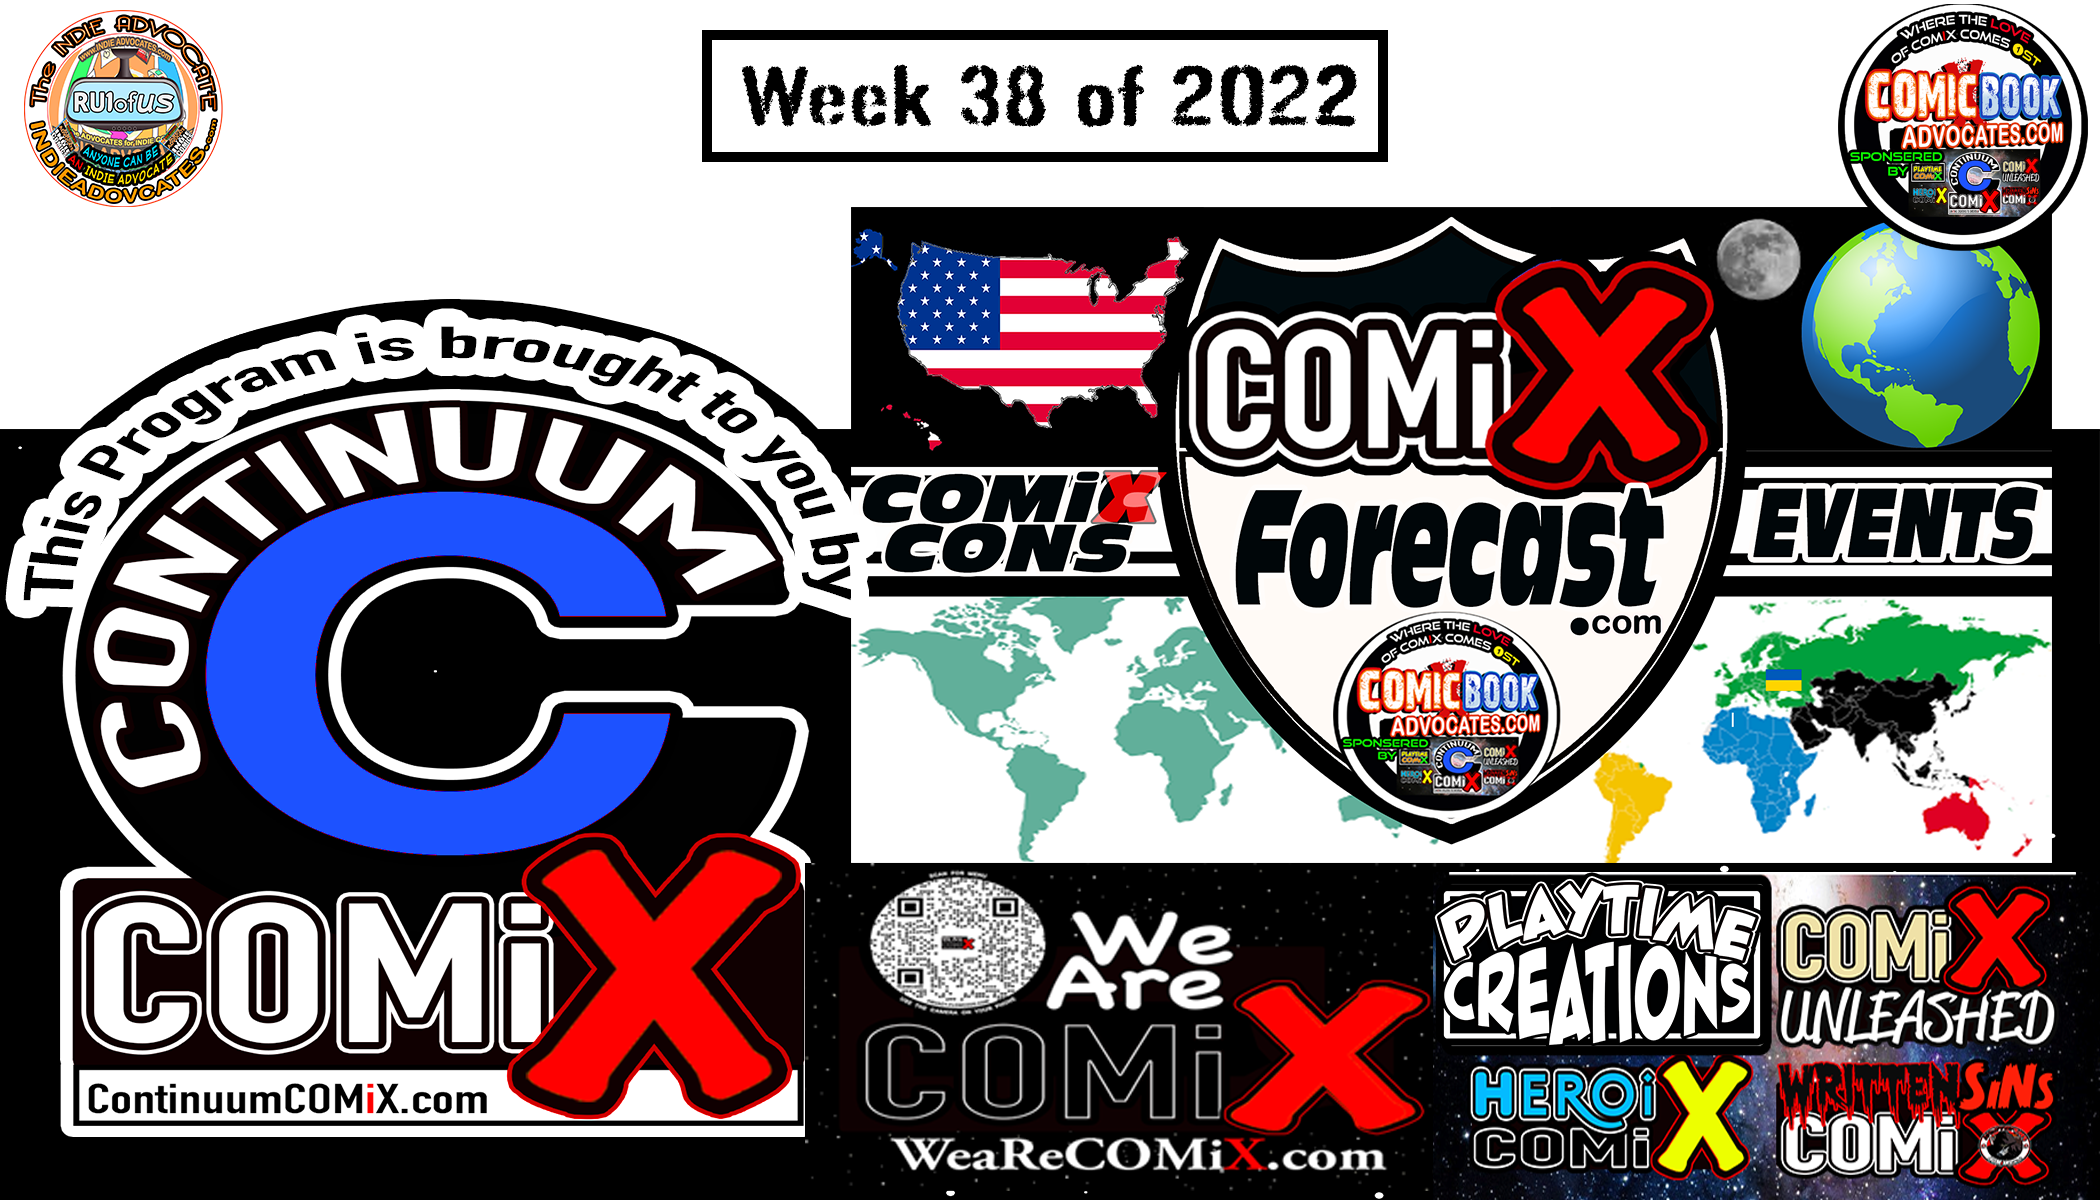 Join the Continuum of Comic Cons by using the COMiXforecast.com MAP for week38of22